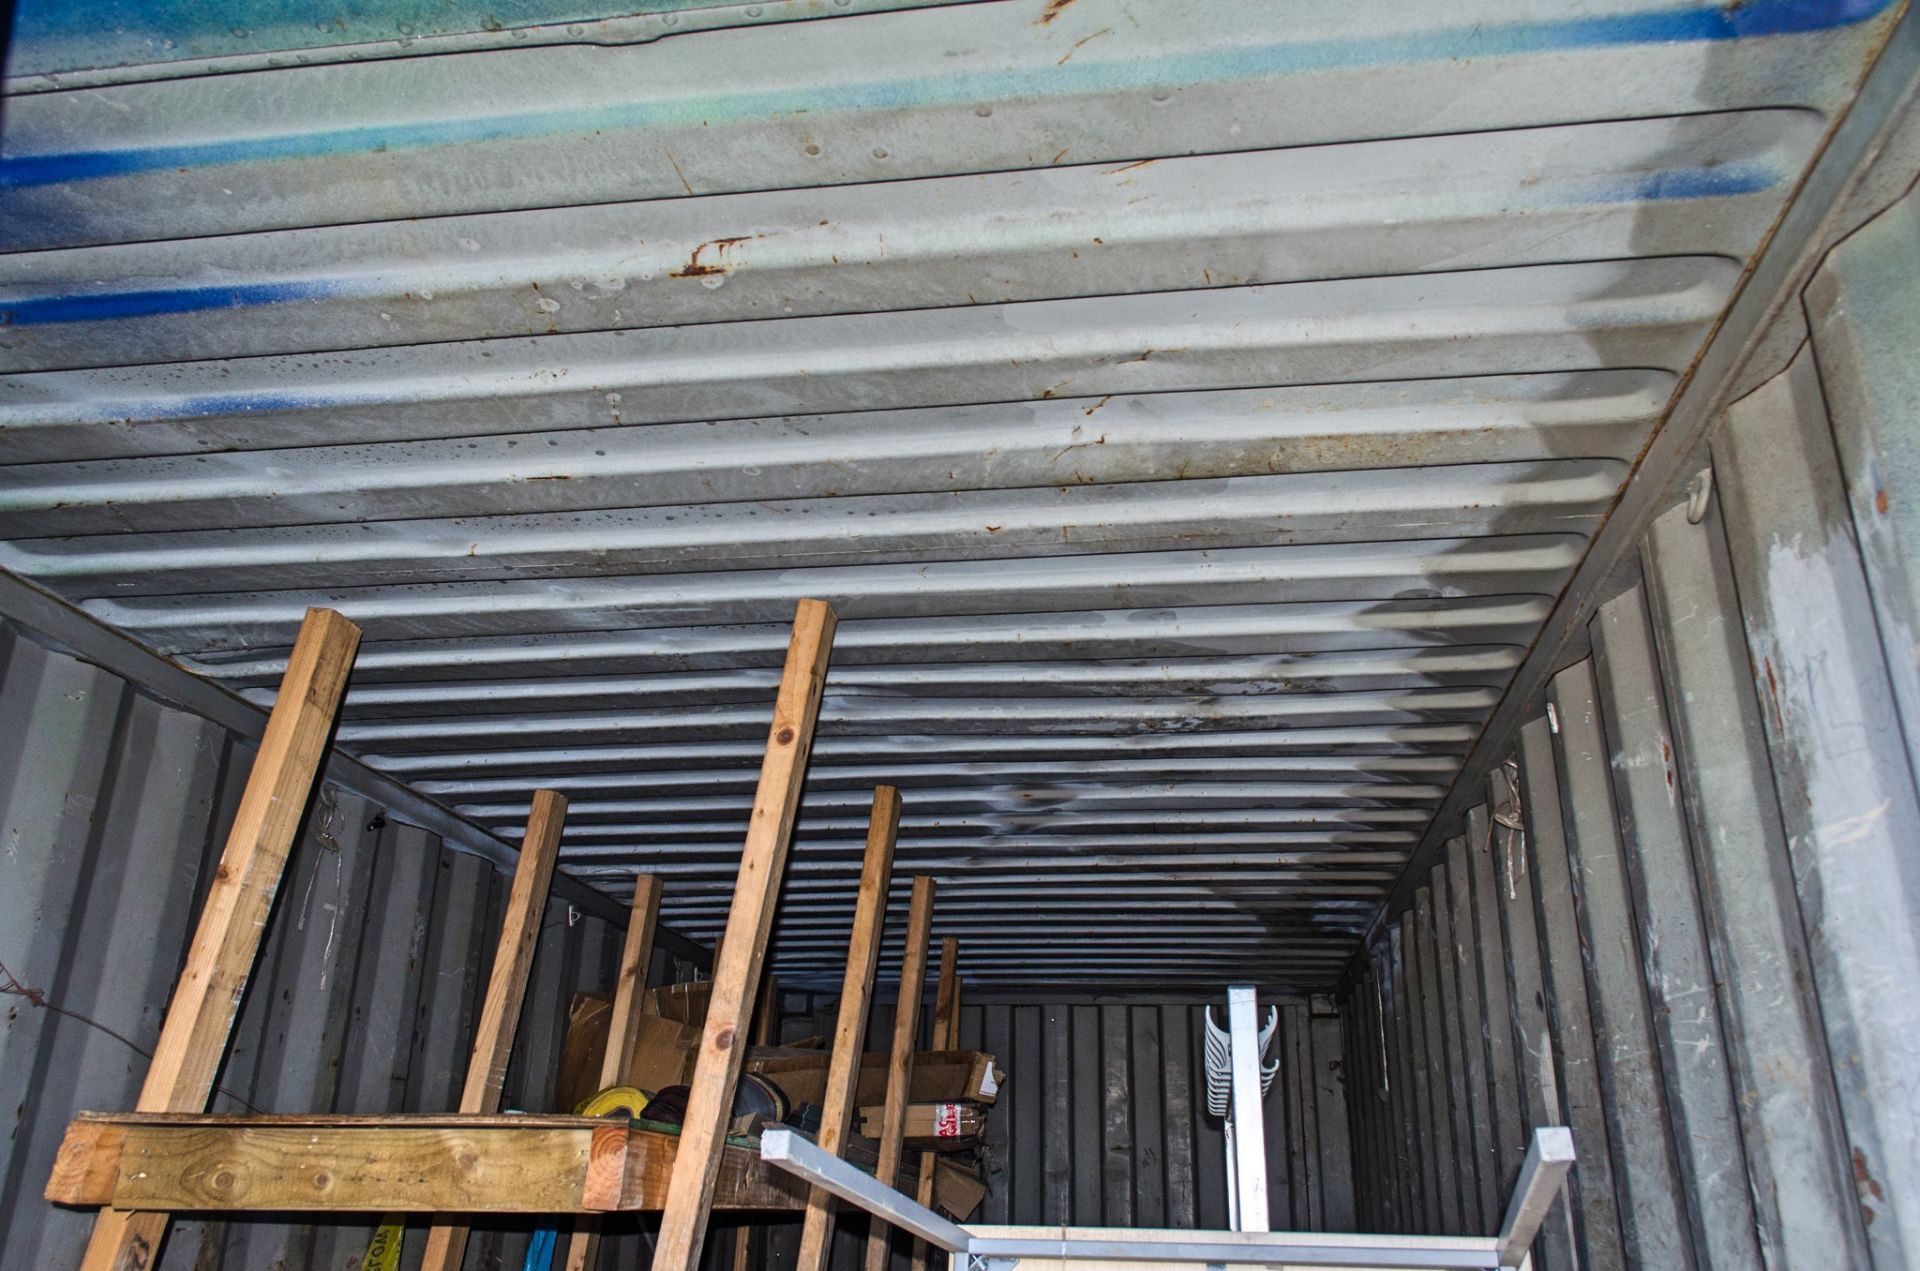 20 ft x 8 ft steel shipping container - Image 6 of 6